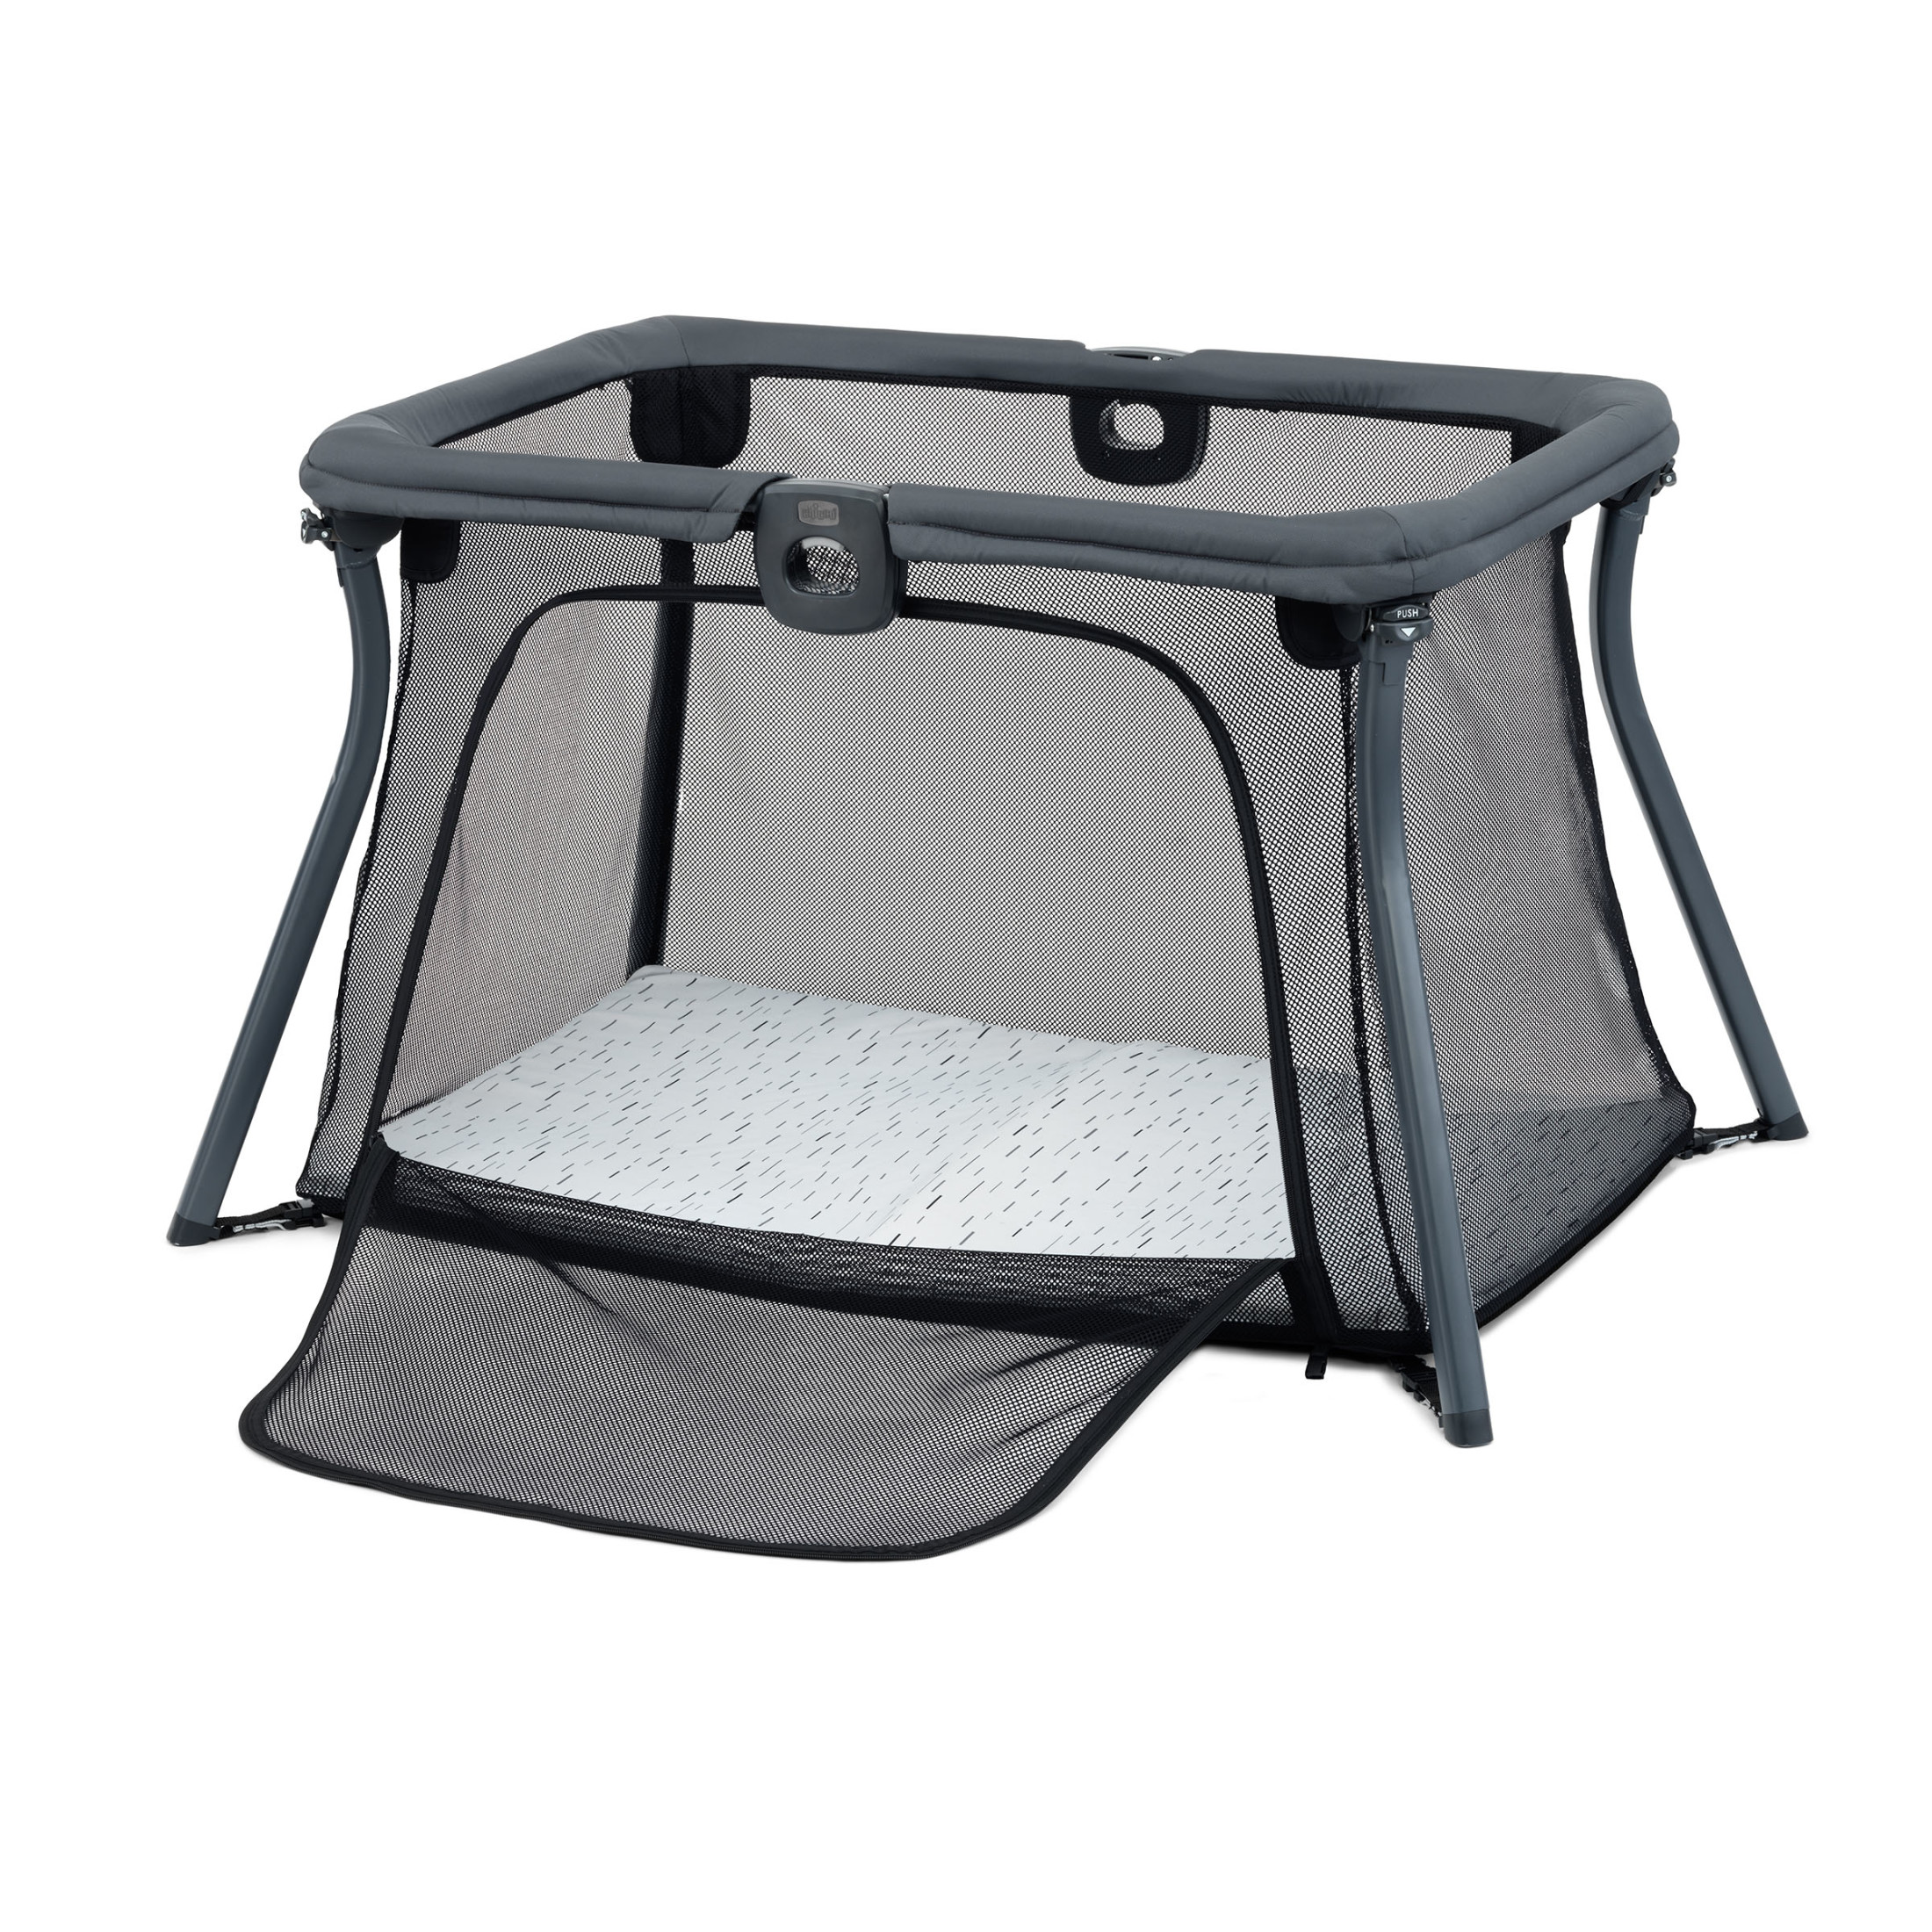 Chicco Alfa Lite Lightweight Travel Playard with Waterproof Mattress, Fitted Sheet Carry Bag - Midnight (Navy) - image 1 of 11